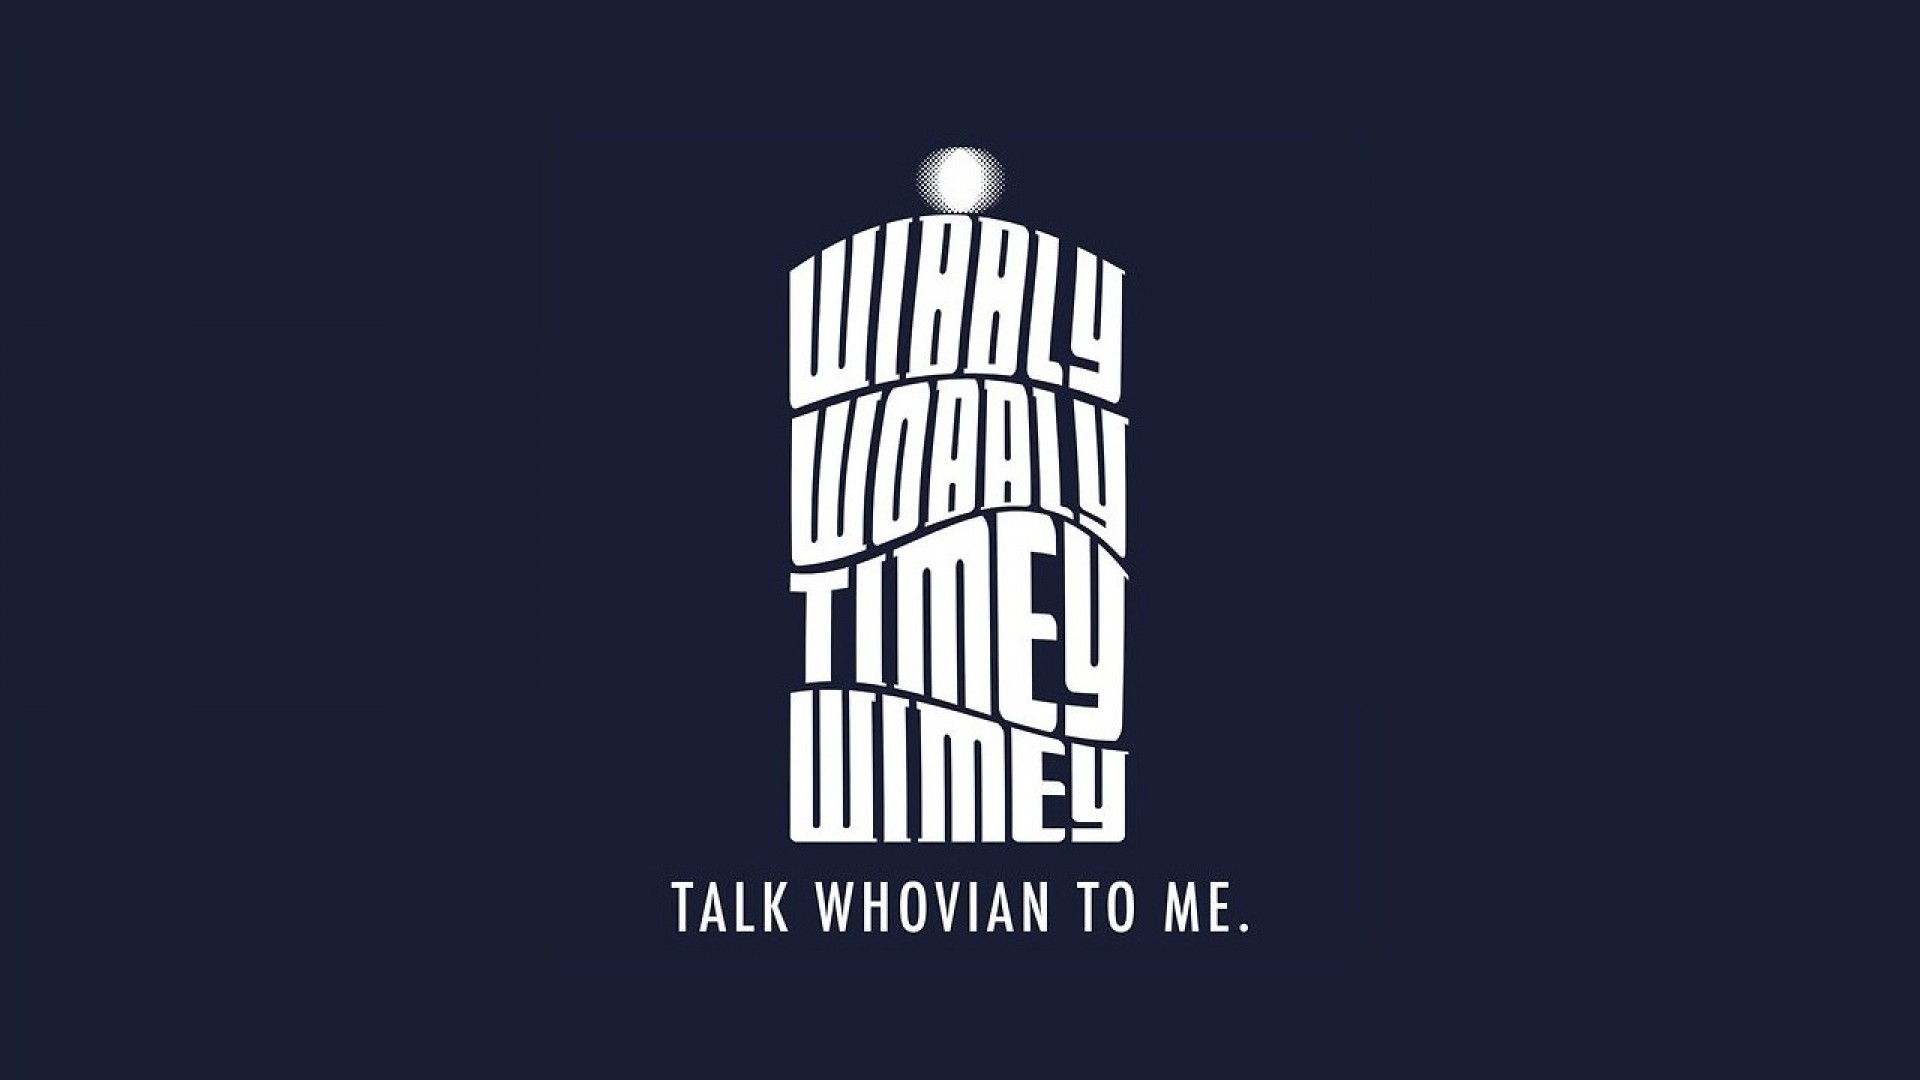 1920x1080 Top Collection of Doctor Who Tardis Wallpapers Doctor Who Tardis | HD  Wallpapers | Pinterest | Live wallpapers, Wallpaper and Wallpaper art